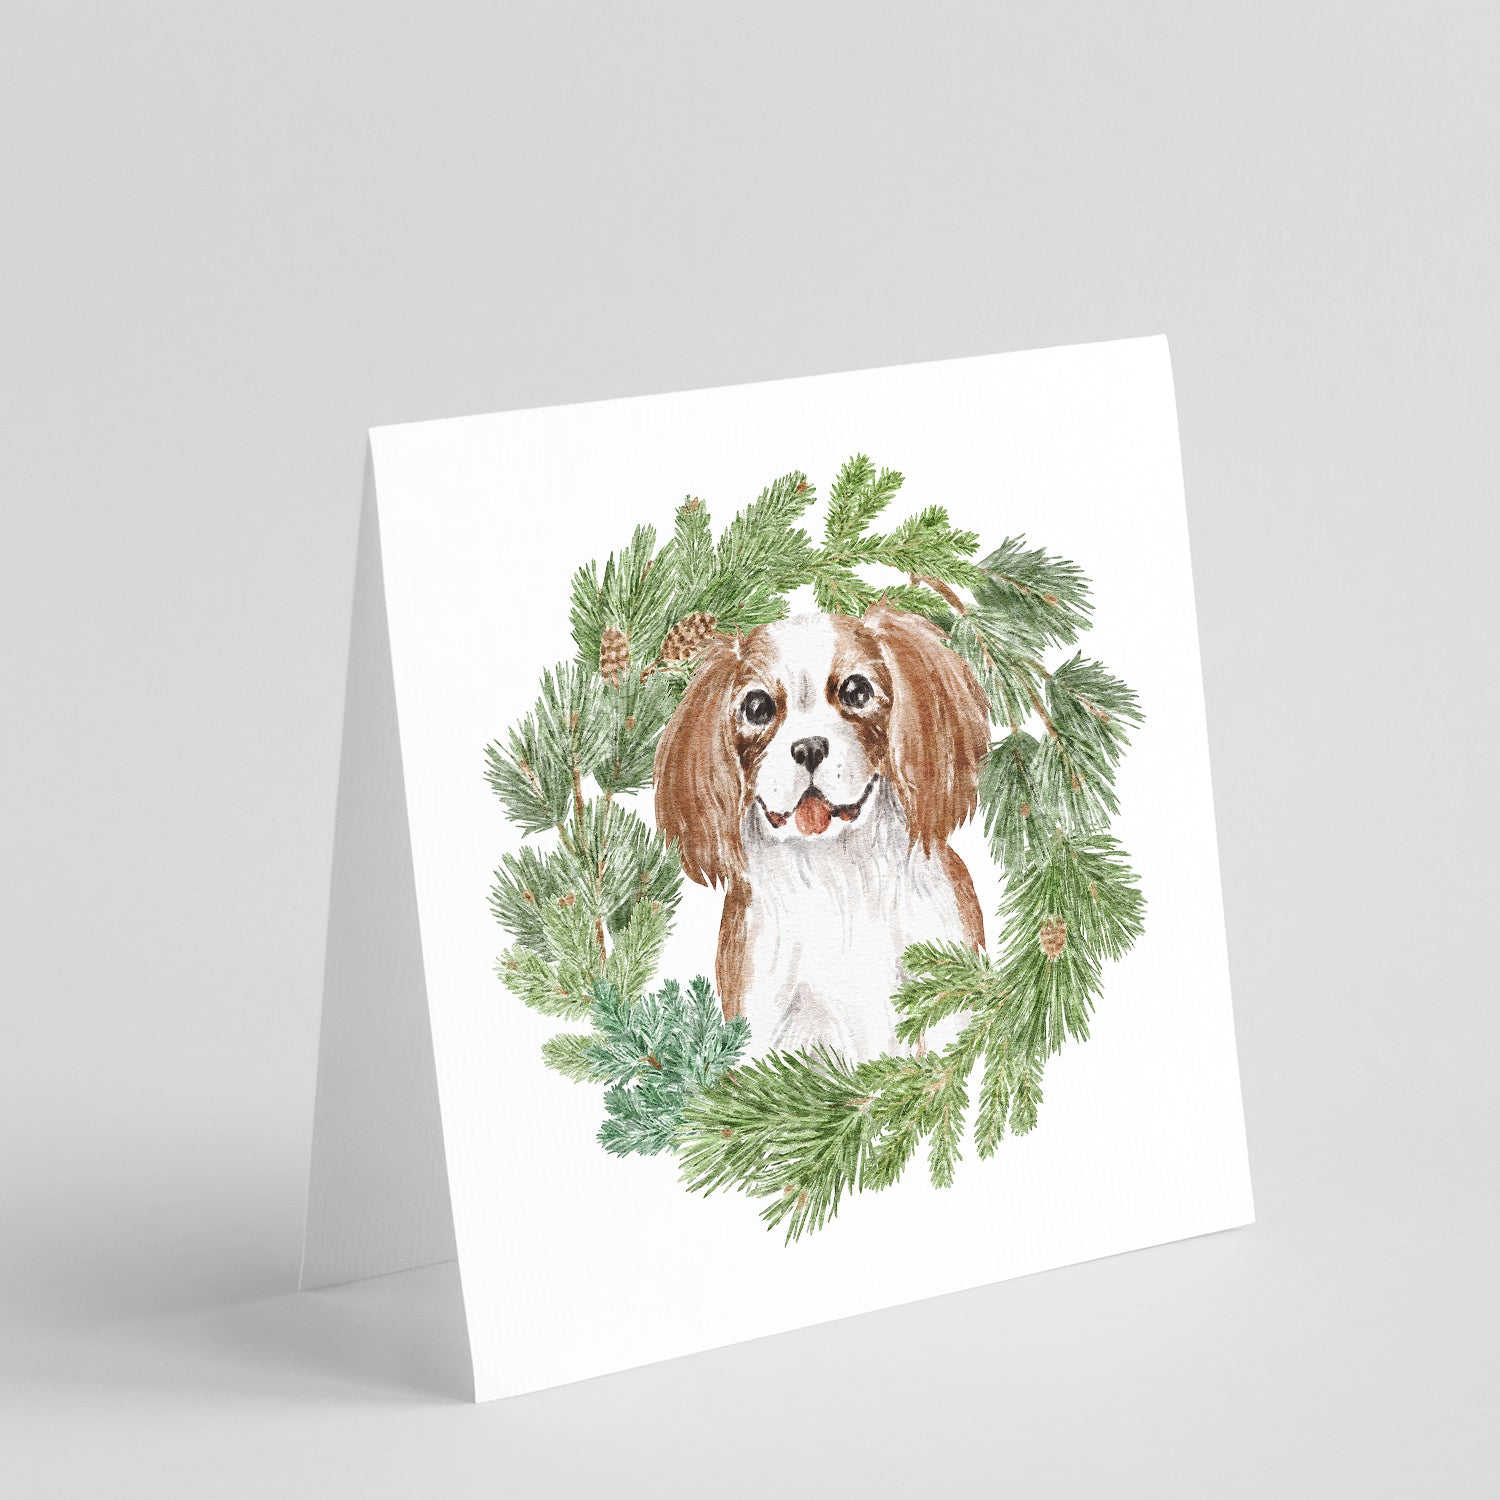 Buy this Cavalier King Charles Spaniel Blenheim Puppy Smiling with Christmas Wreath Square Greeting Cards and Envelopes Pack of 8